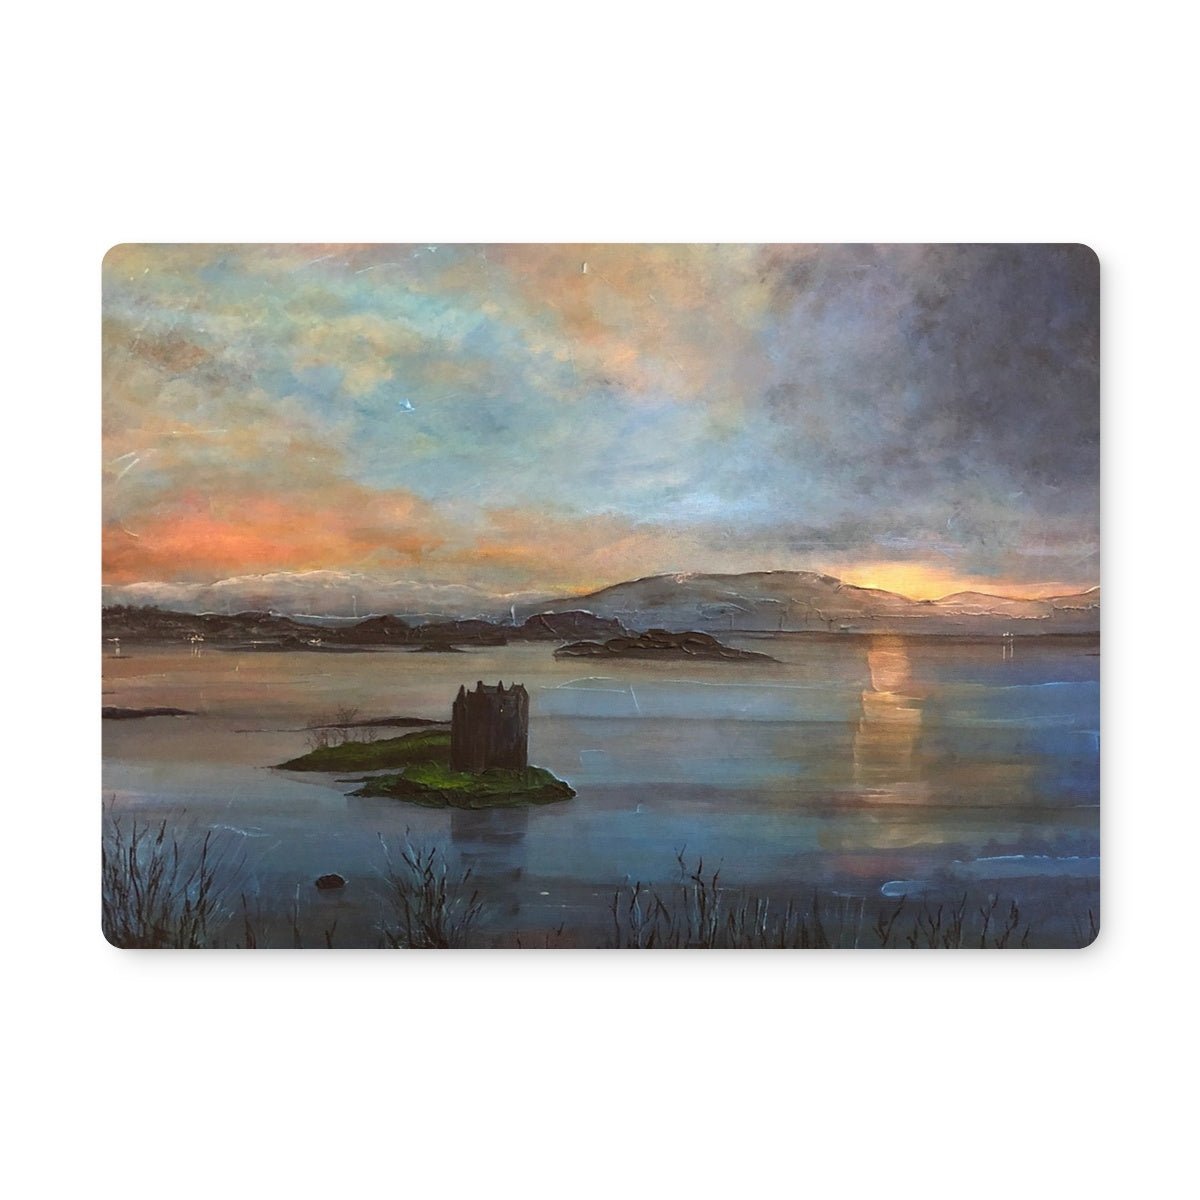 Castle Stalker Twilight Art Gifts Placemat-Placemats-Scottish Castles Art Gallery-2 Placemats-Paintings, Prints, Homeware, Art Gifts From Scotland By Scottish Artist Kevin Hunter